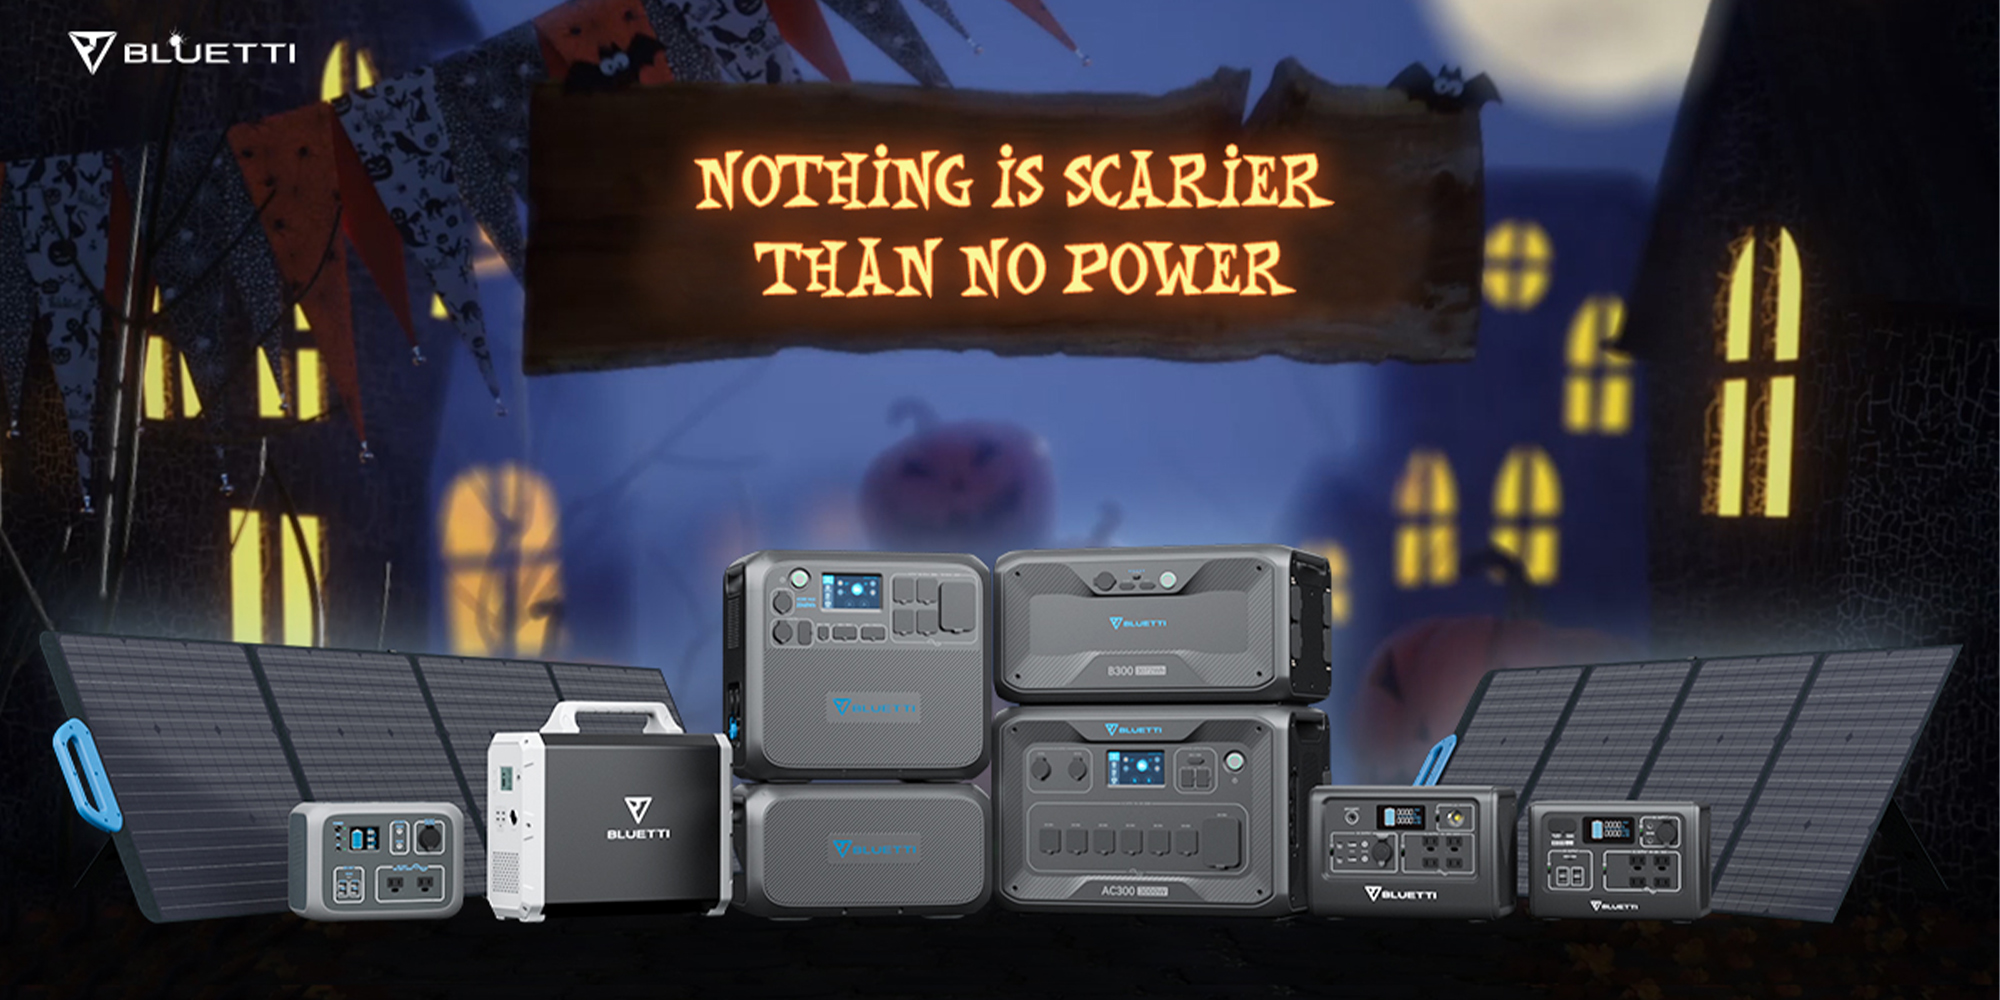 Check out these scary good Halloween deals on BLUETTI portable power stations up to $3,900 off - Electrek